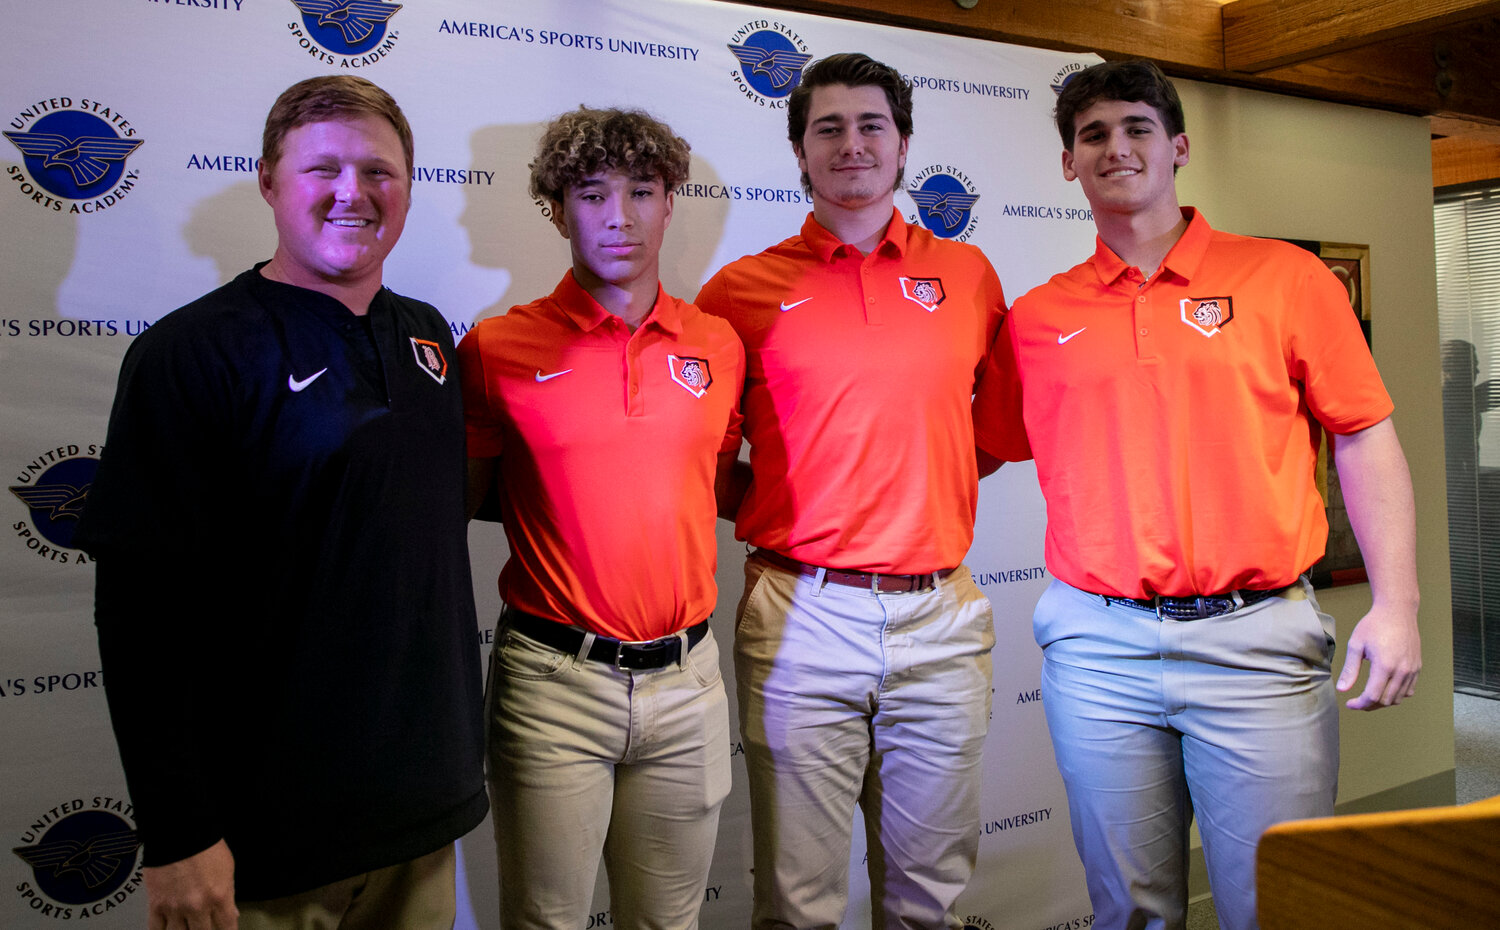 The Baldwin County Tiger representatives on hand for Tuesday’s media day event at the United States Sports Academy included head coach Trenton Higginbothem and seniors Quincy Walters, Eli Woody and Jaxen Schuler.